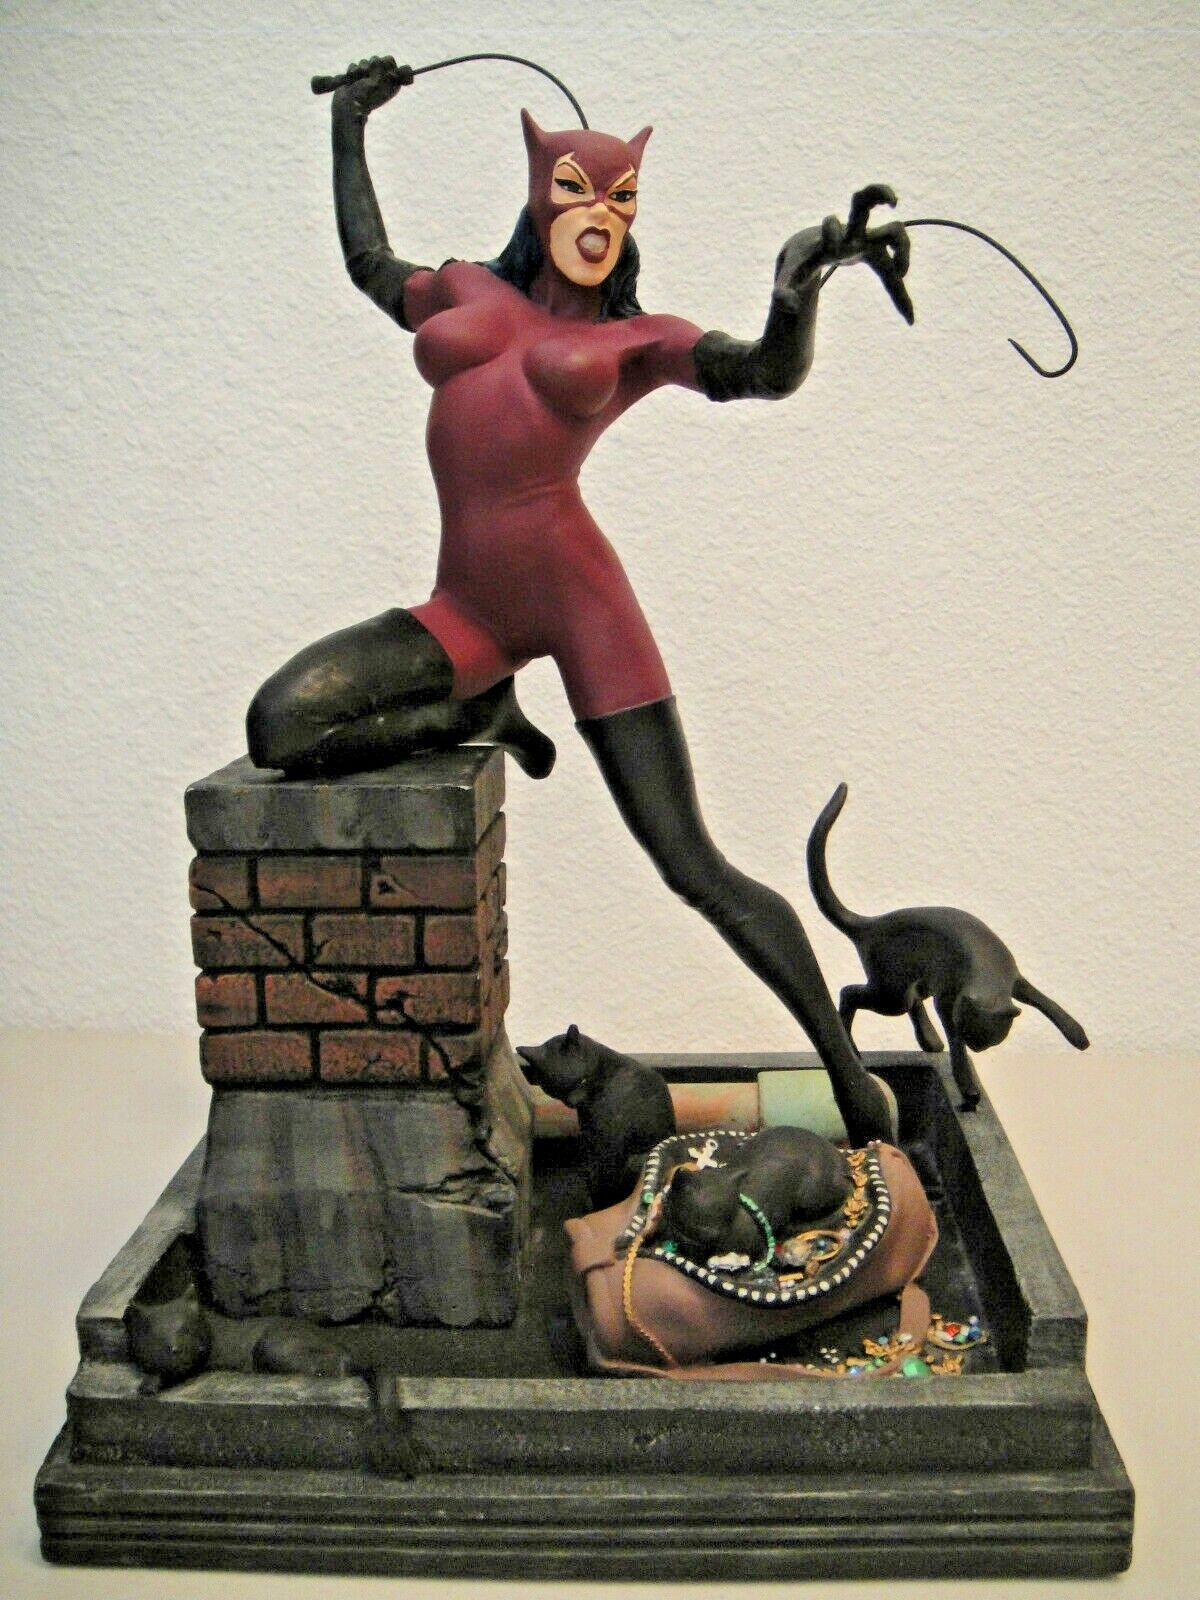 DC DIRECT CATWOMAN  STATUE MAQUETTE By Paquet BATMAN Rises Figurine TOY ANIMATED